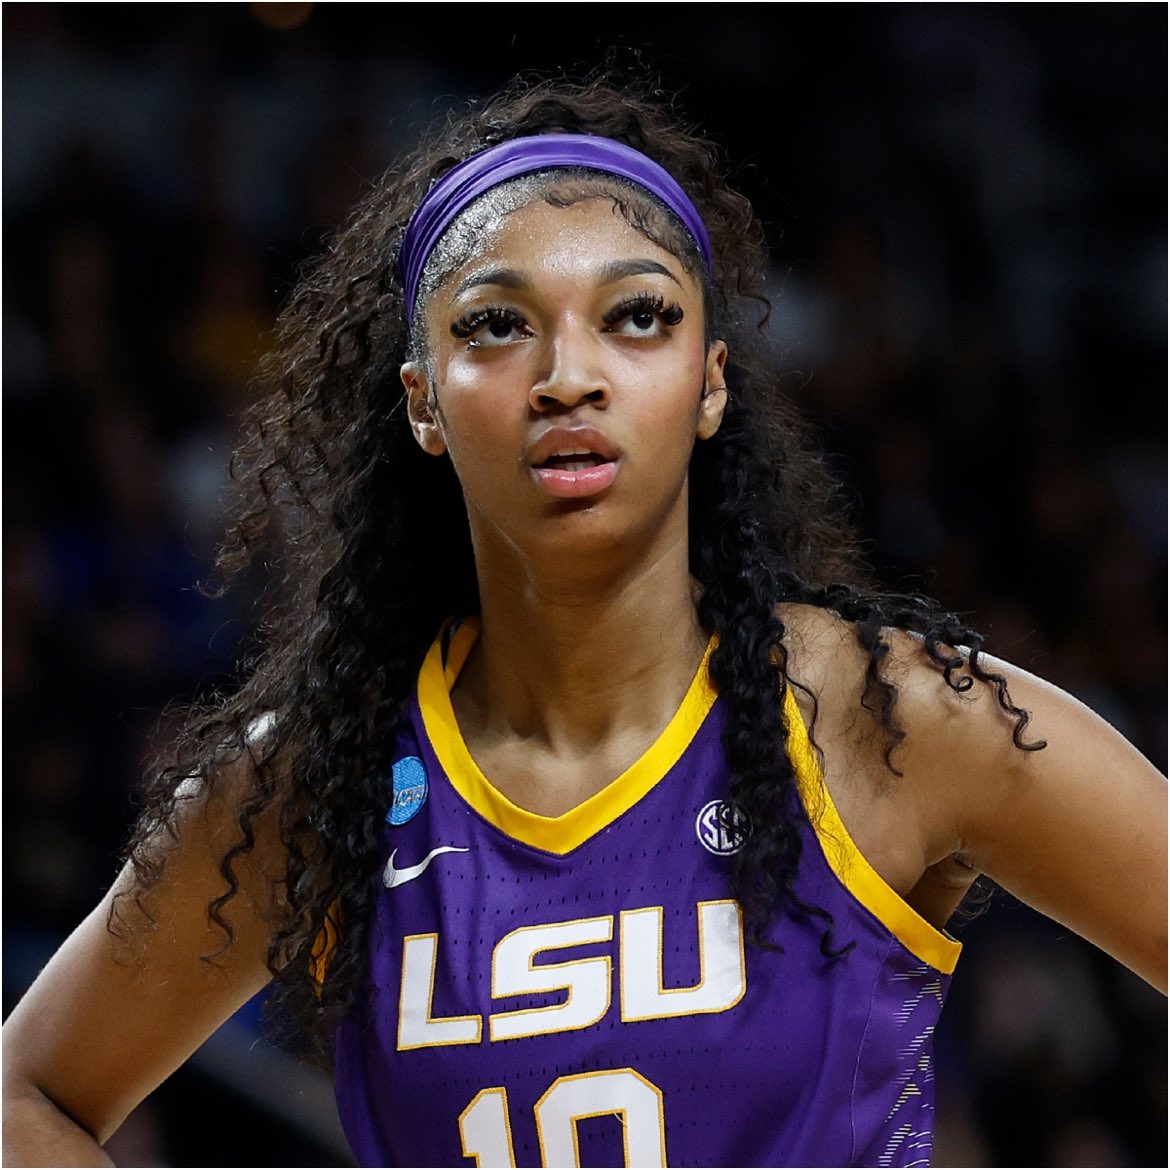 Angel Reese, the former LSU star who was a top pick in the WNBA Draft, is going viral after taking a stand for young female athletes.

'Protect young women in sports!!!'